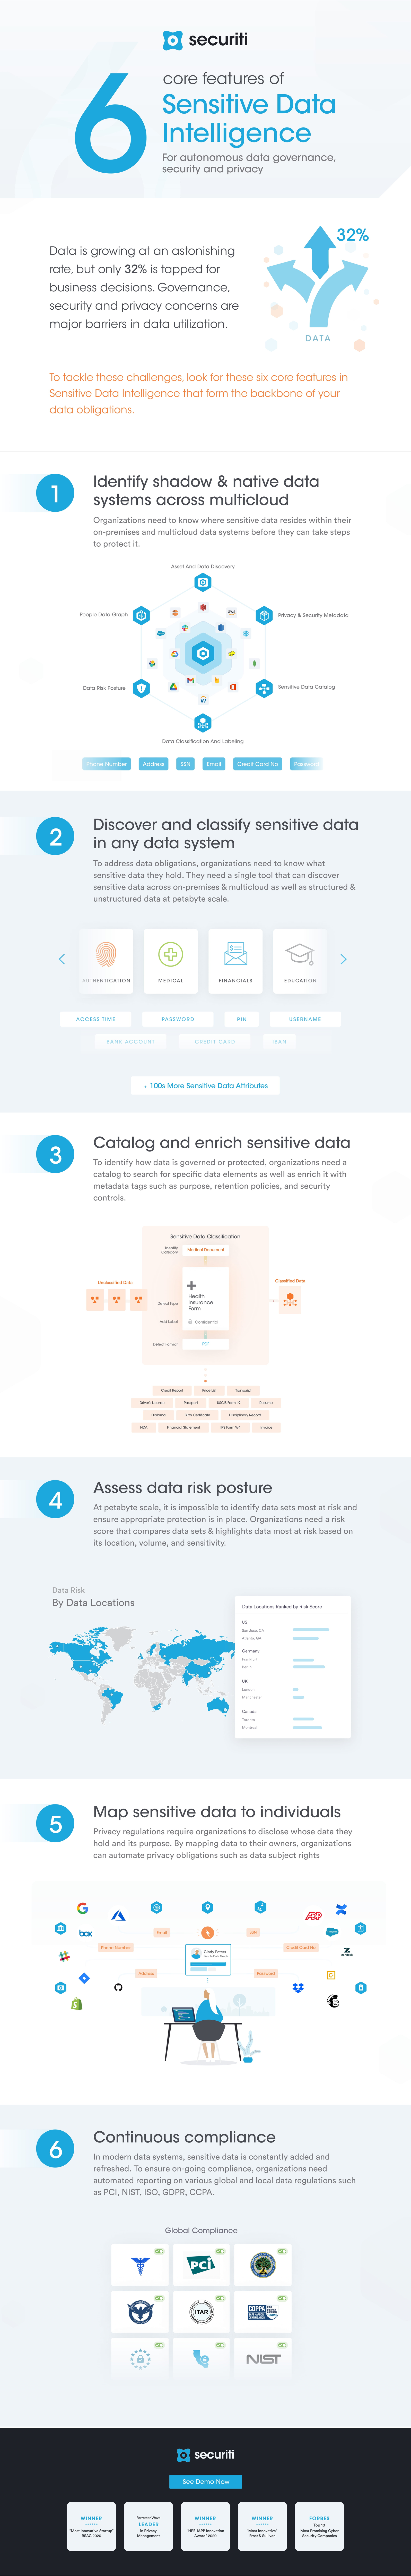 6 Core Features of Sensitive Data Intelligence